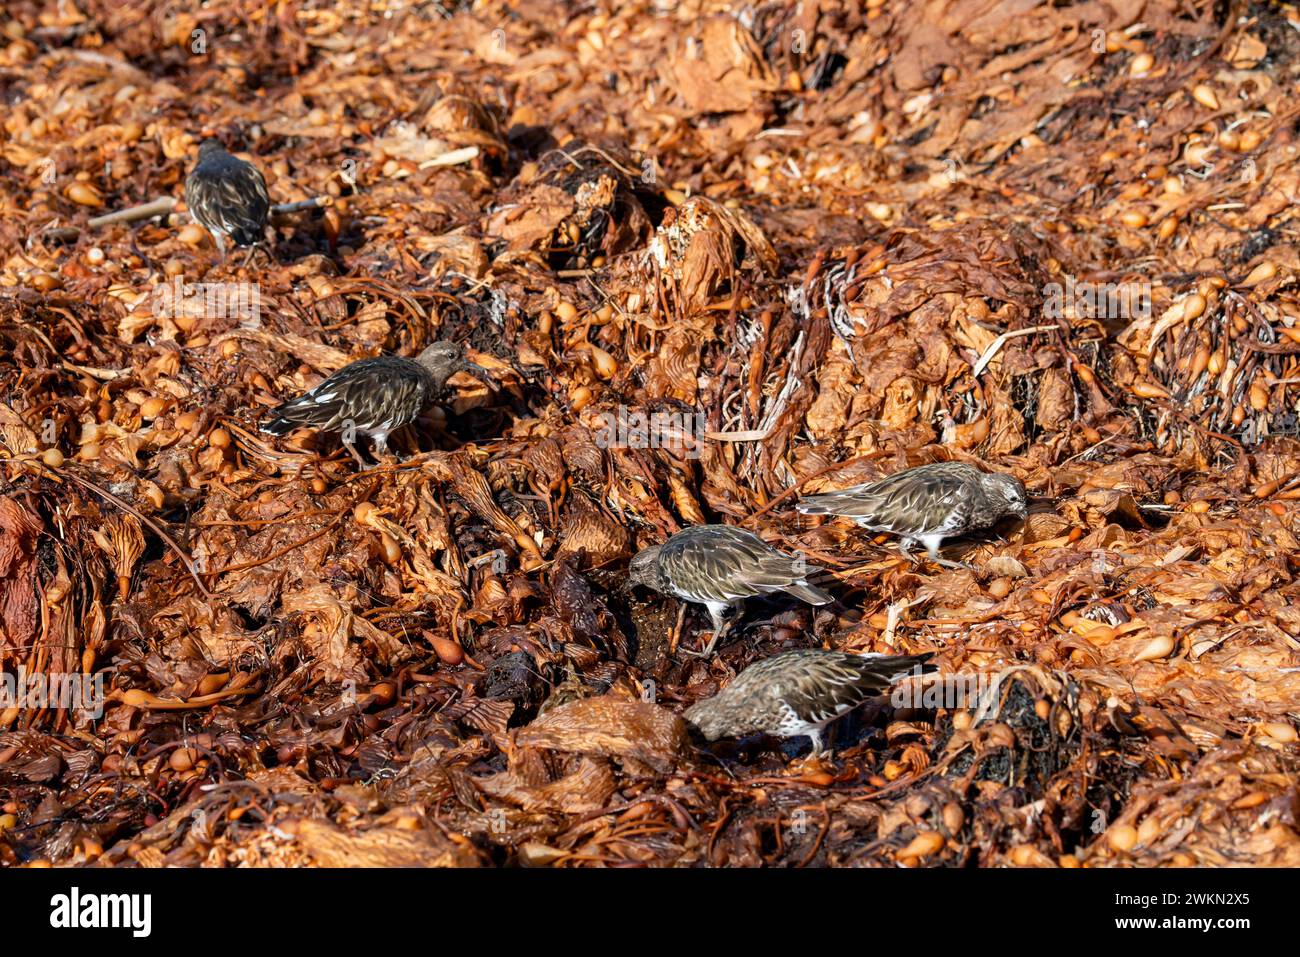 Laguna Beach, California. A flock of Black Turnstones looking for barnacles and limpets in the seaweed on the Pacific Ocean beach. Stock Photo